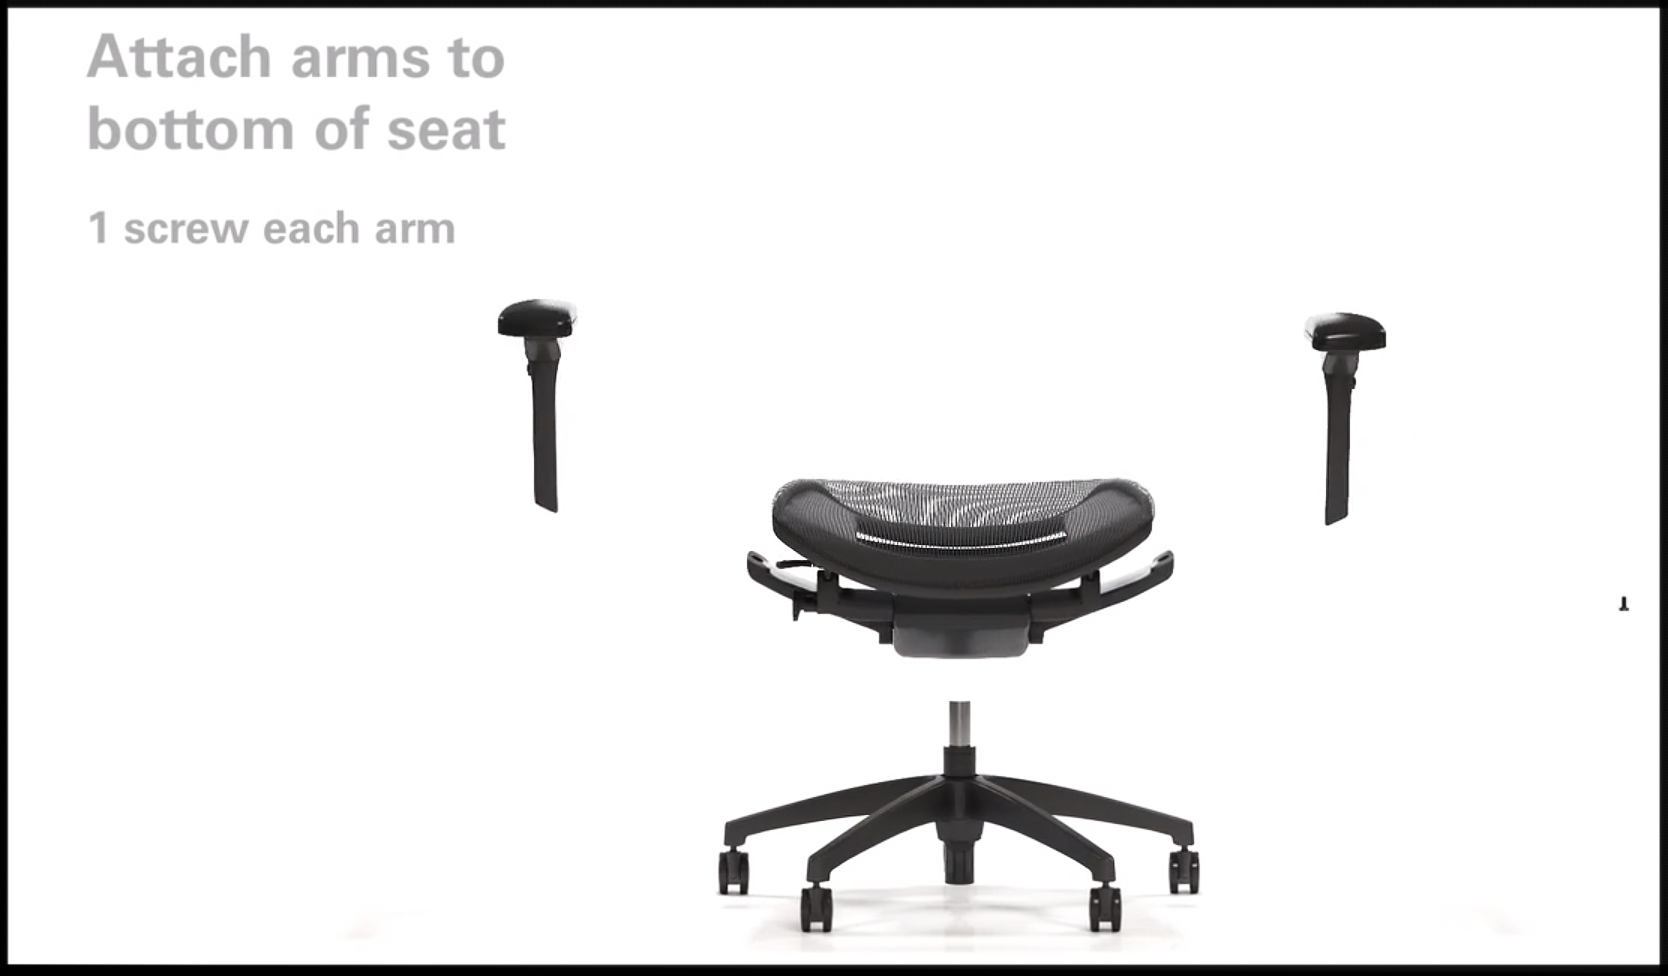 This is a 3D rendered image from Trinity's 3D product animation demonstrating the assembly and operation of the the iOO Office Chair. Each individual part of the office chair is animated separately as it maneuvers onto the screen during the demonstration of the assembly process. In this image The wheels, base, seat, and both arms arms are displayed hovering in space. During the animation, each of these pieces are displayed maneuvering and assembling itself - while providing viewers with the information they need to assemble this office chair.